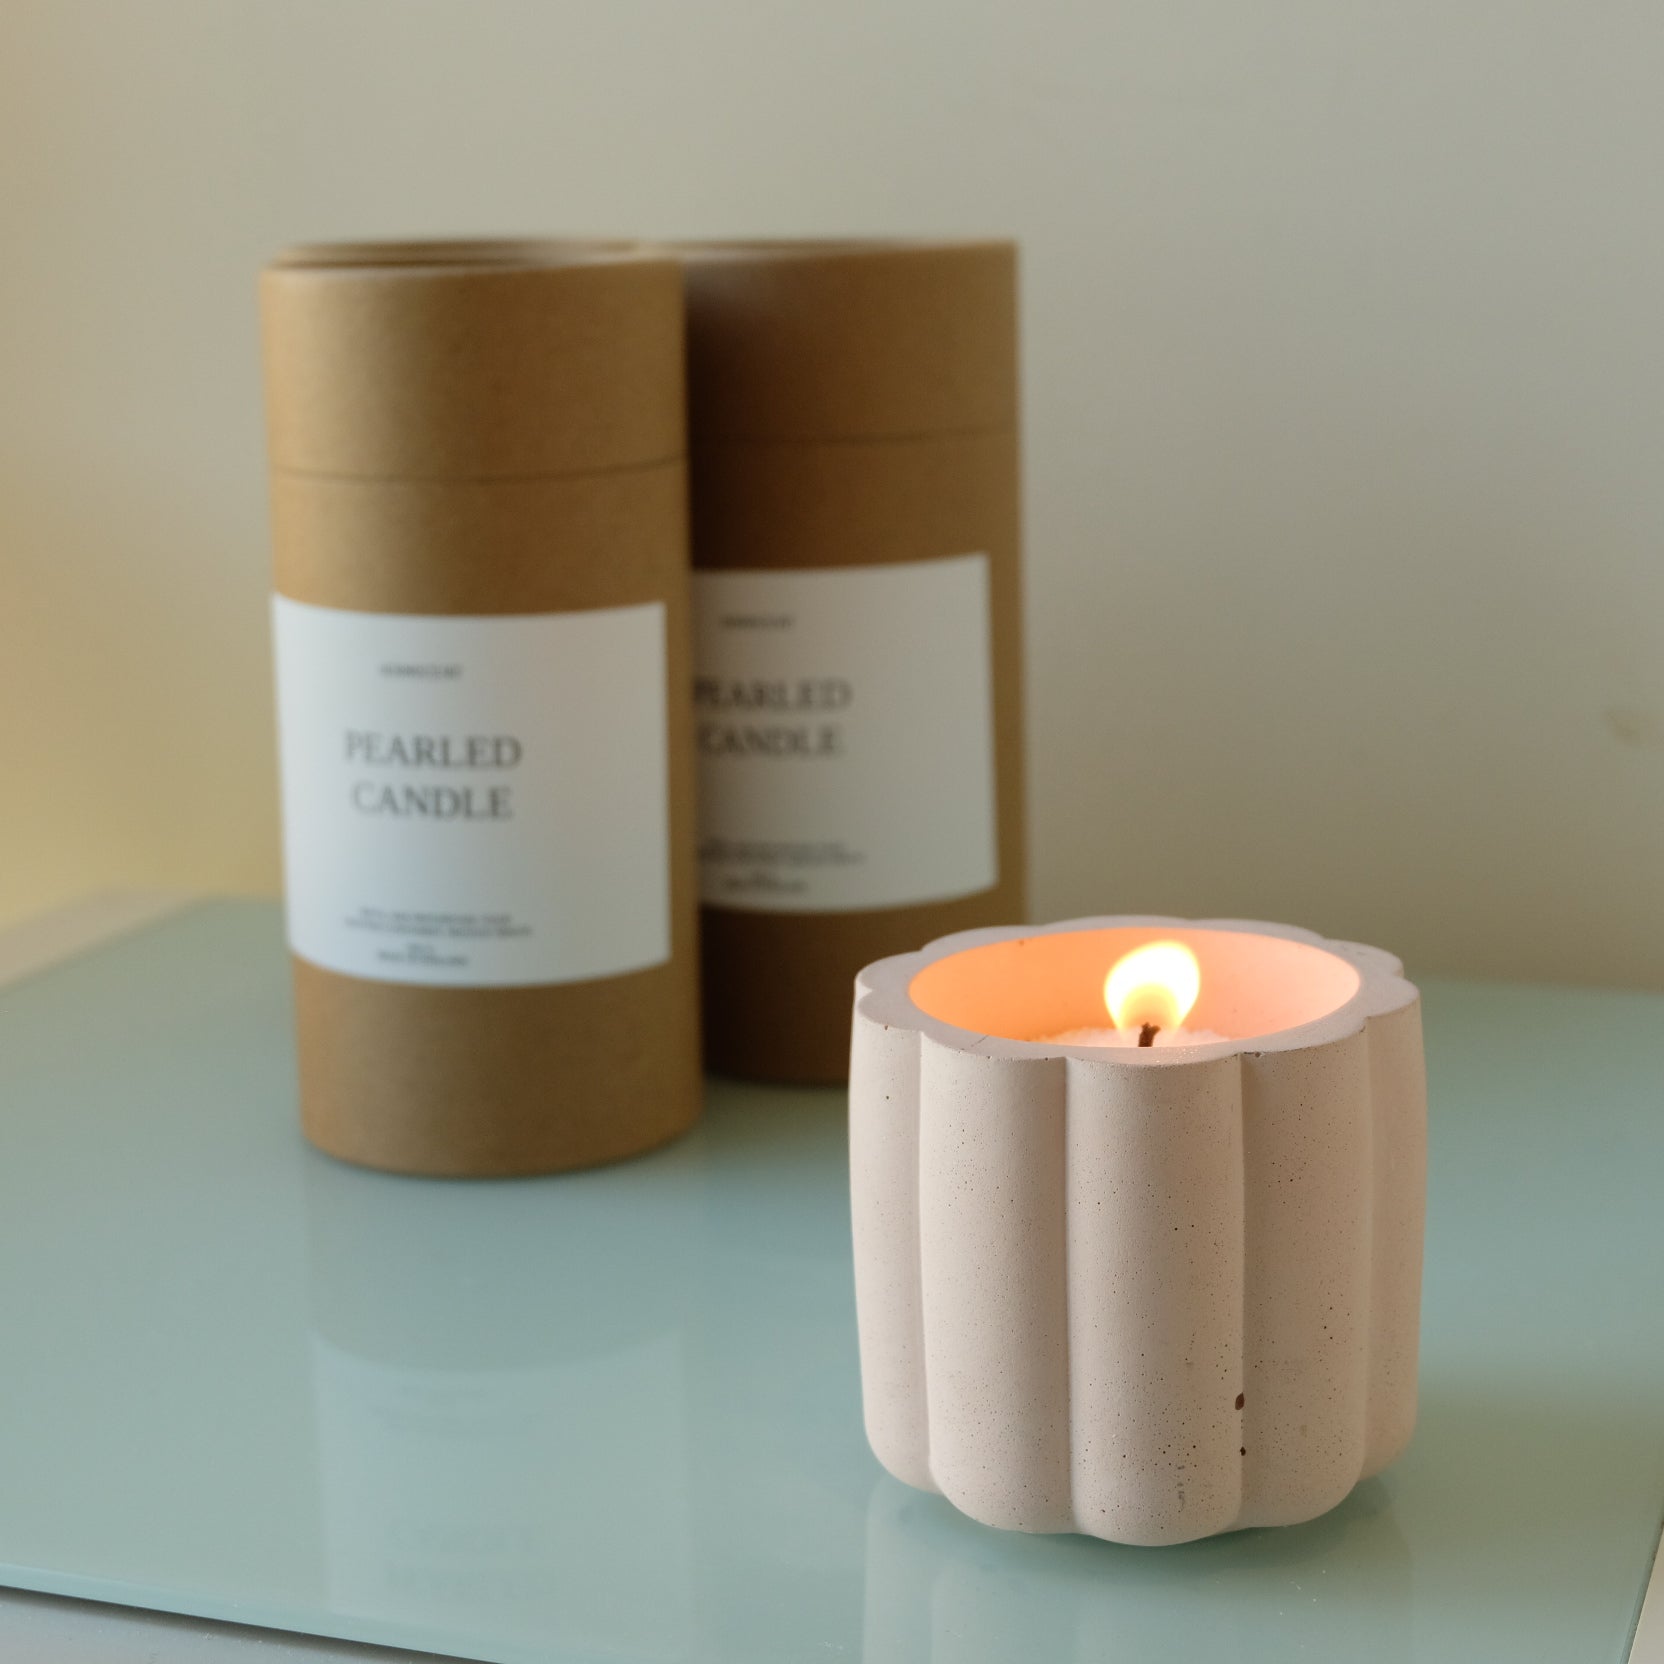 Customize Your Own Scent of Pearled Candles by The Candledust - Issuu